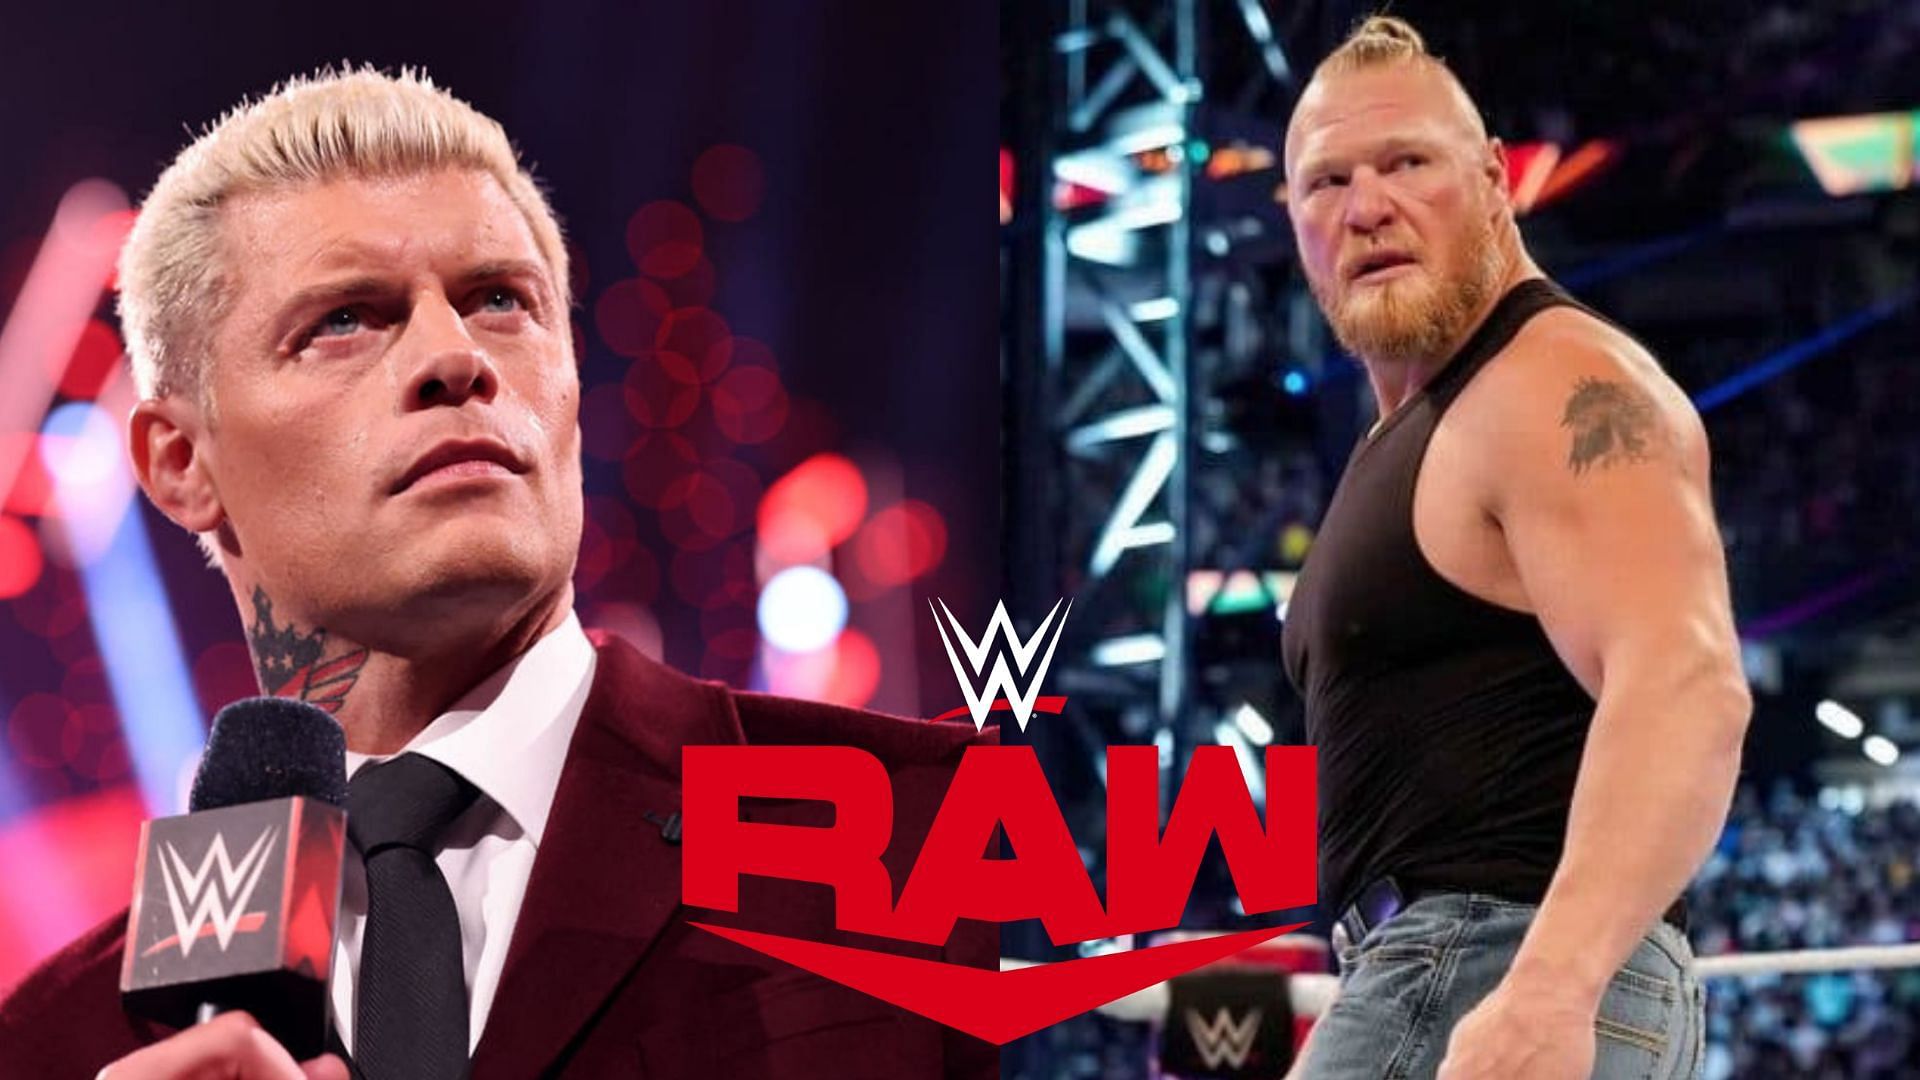 Tonight marks the final WWE RAW episode before WrestleMania 39